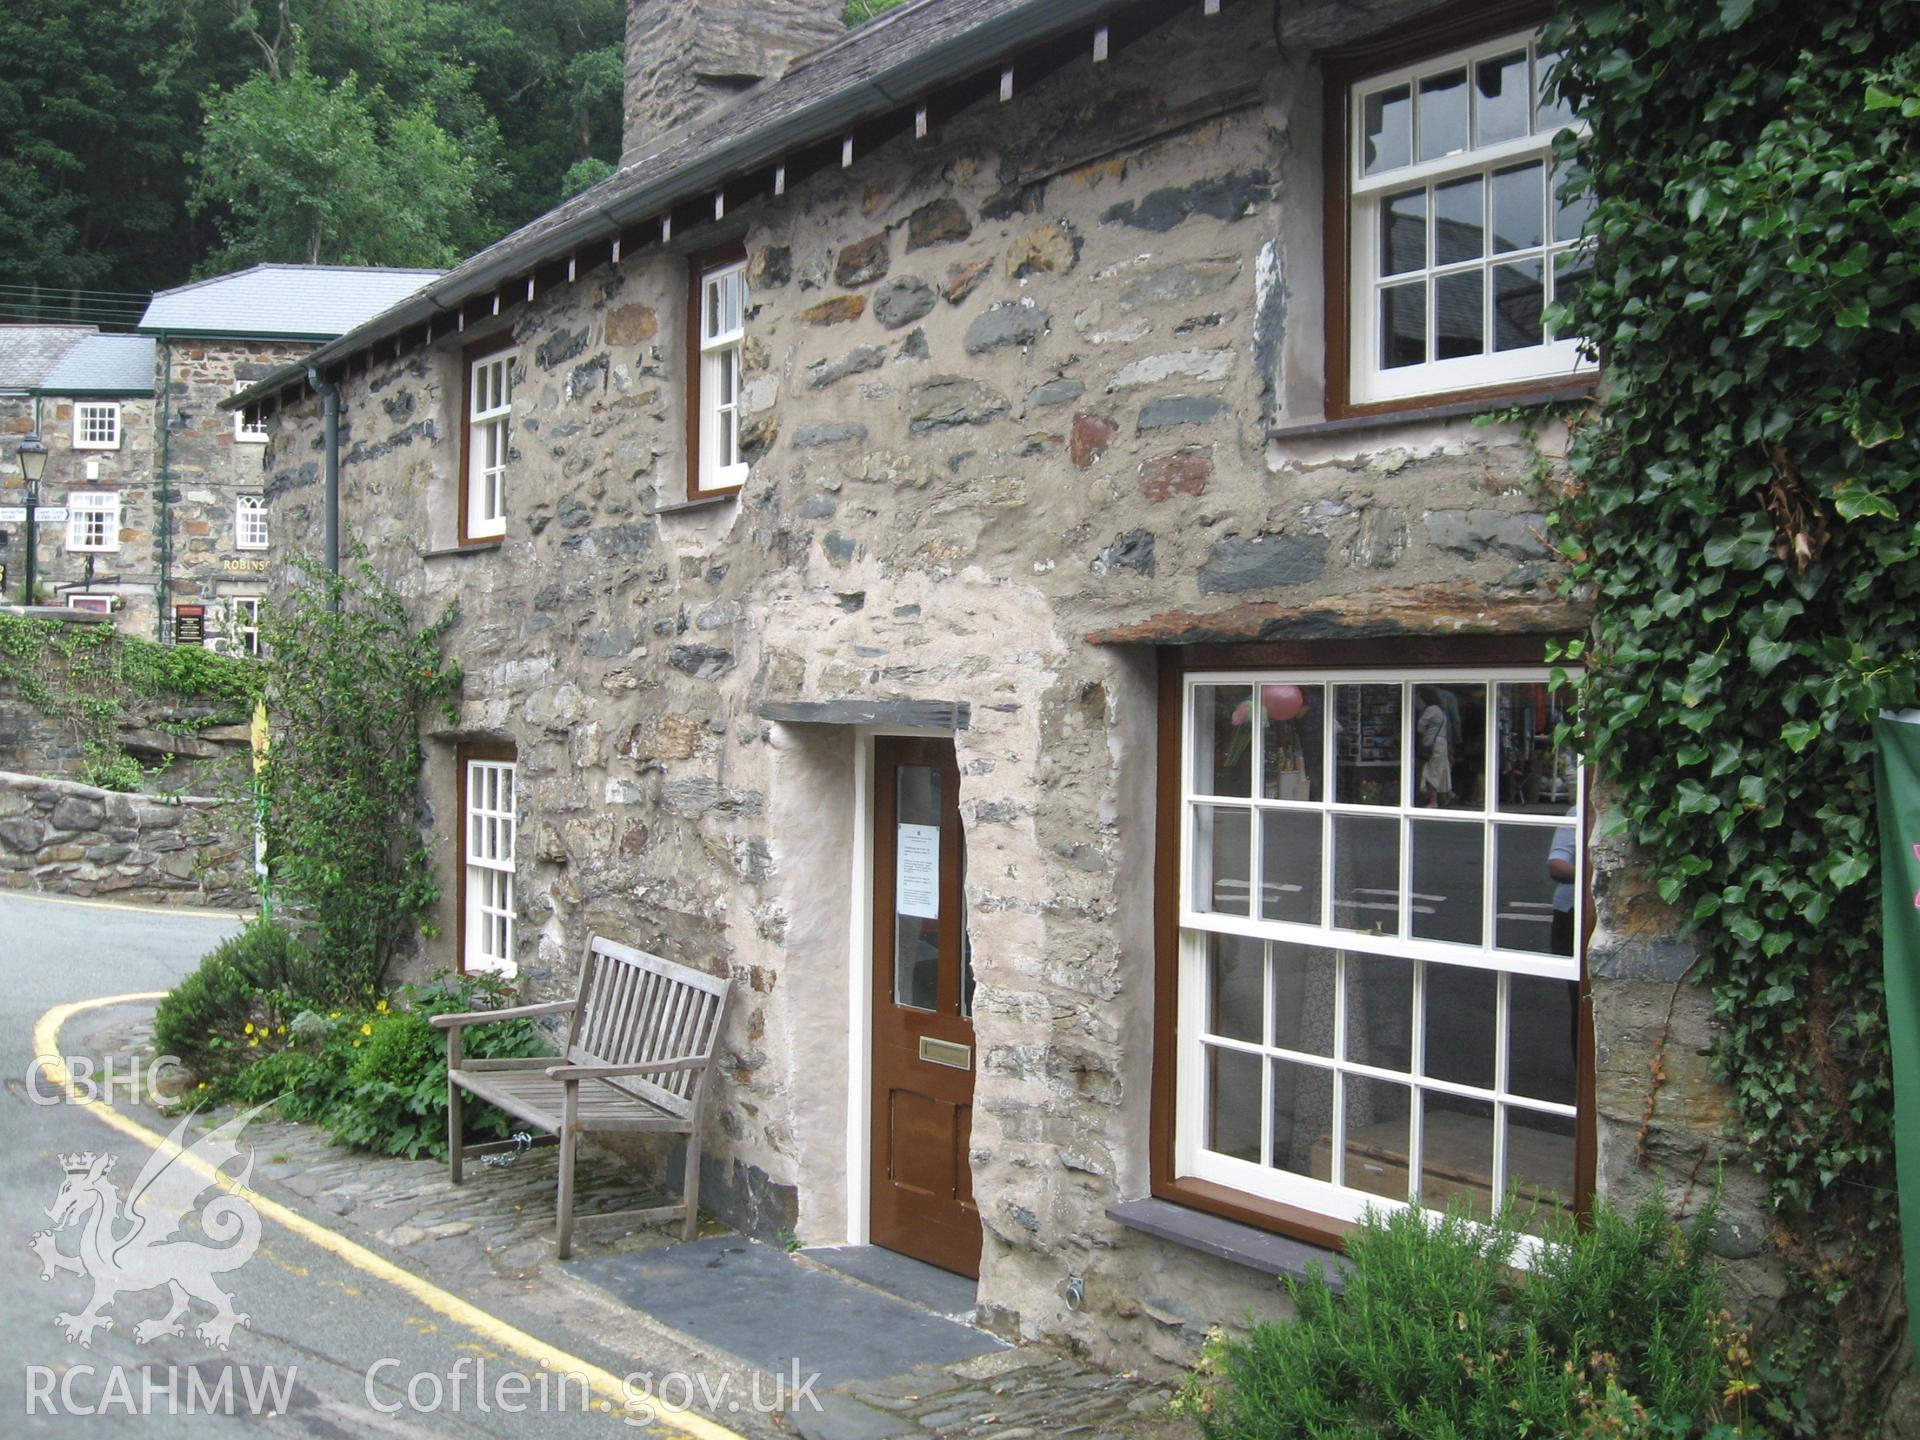 Colour photo of Ty Isaf, Beddgelert, taken by Paul R. Davis, dated 10th May 2006.